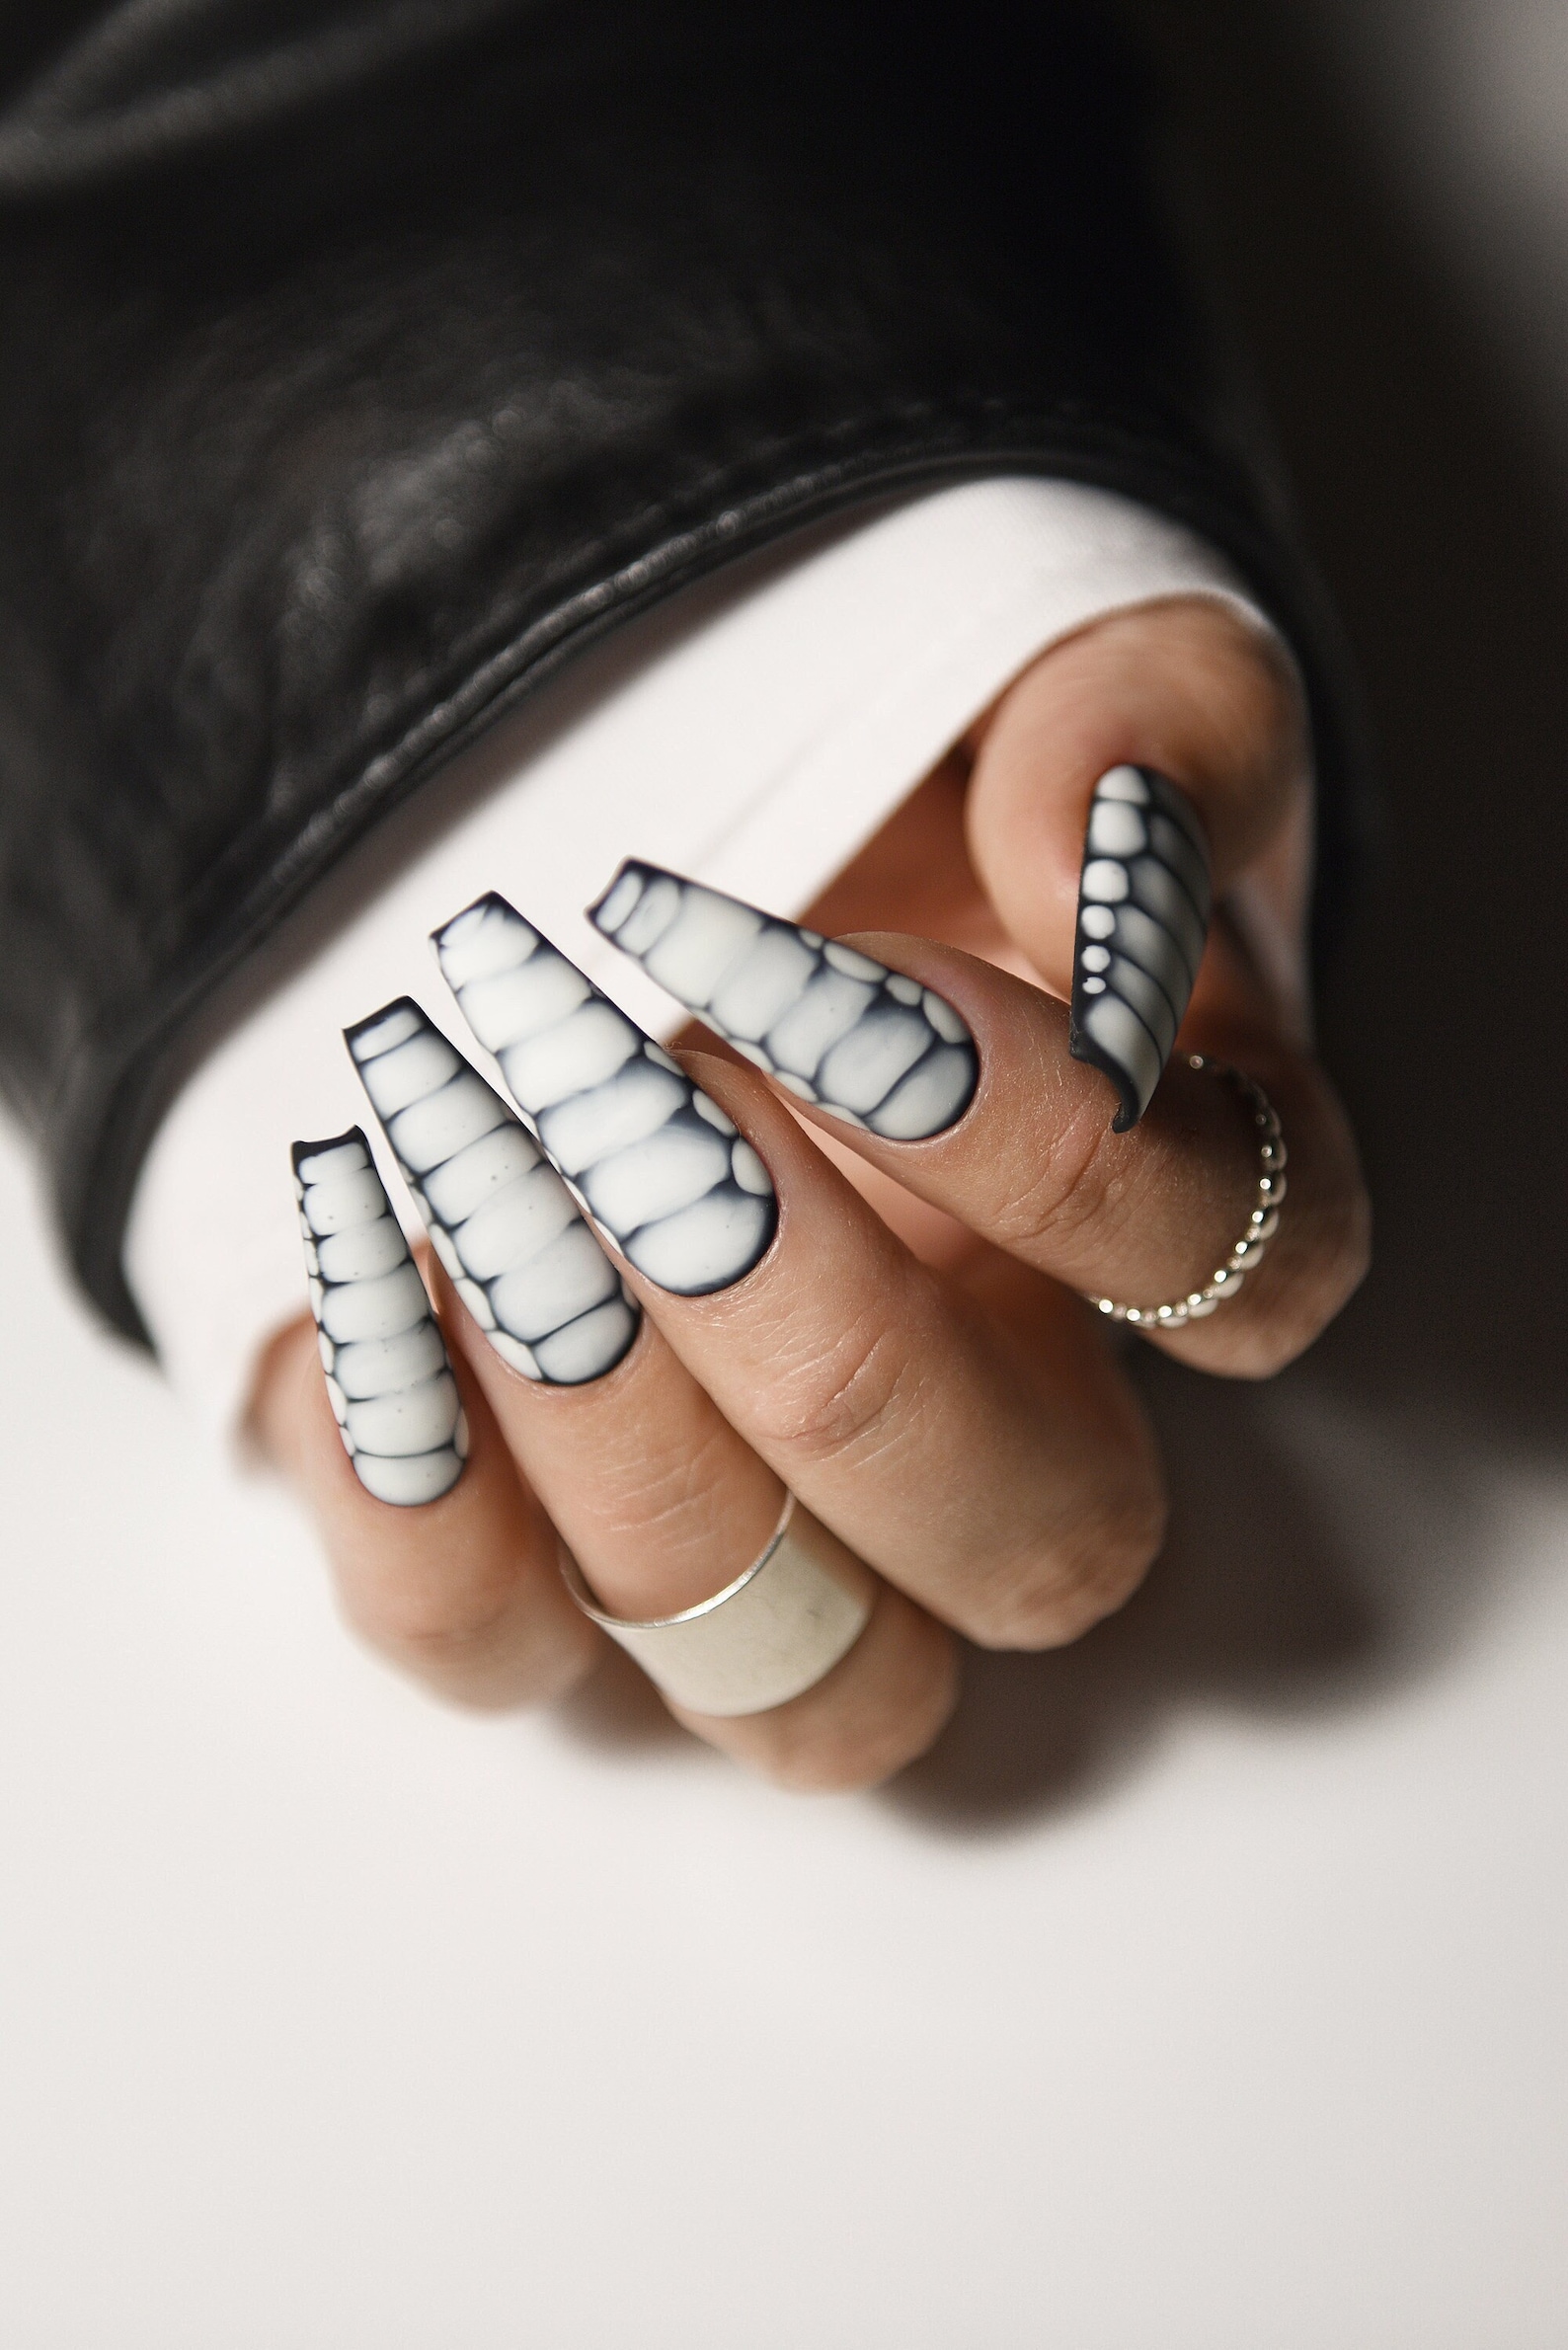 Grunge Fashion Fusion: Bring Flannel Shirts, Ripped Jeans & Graphic Tees into your Manicure